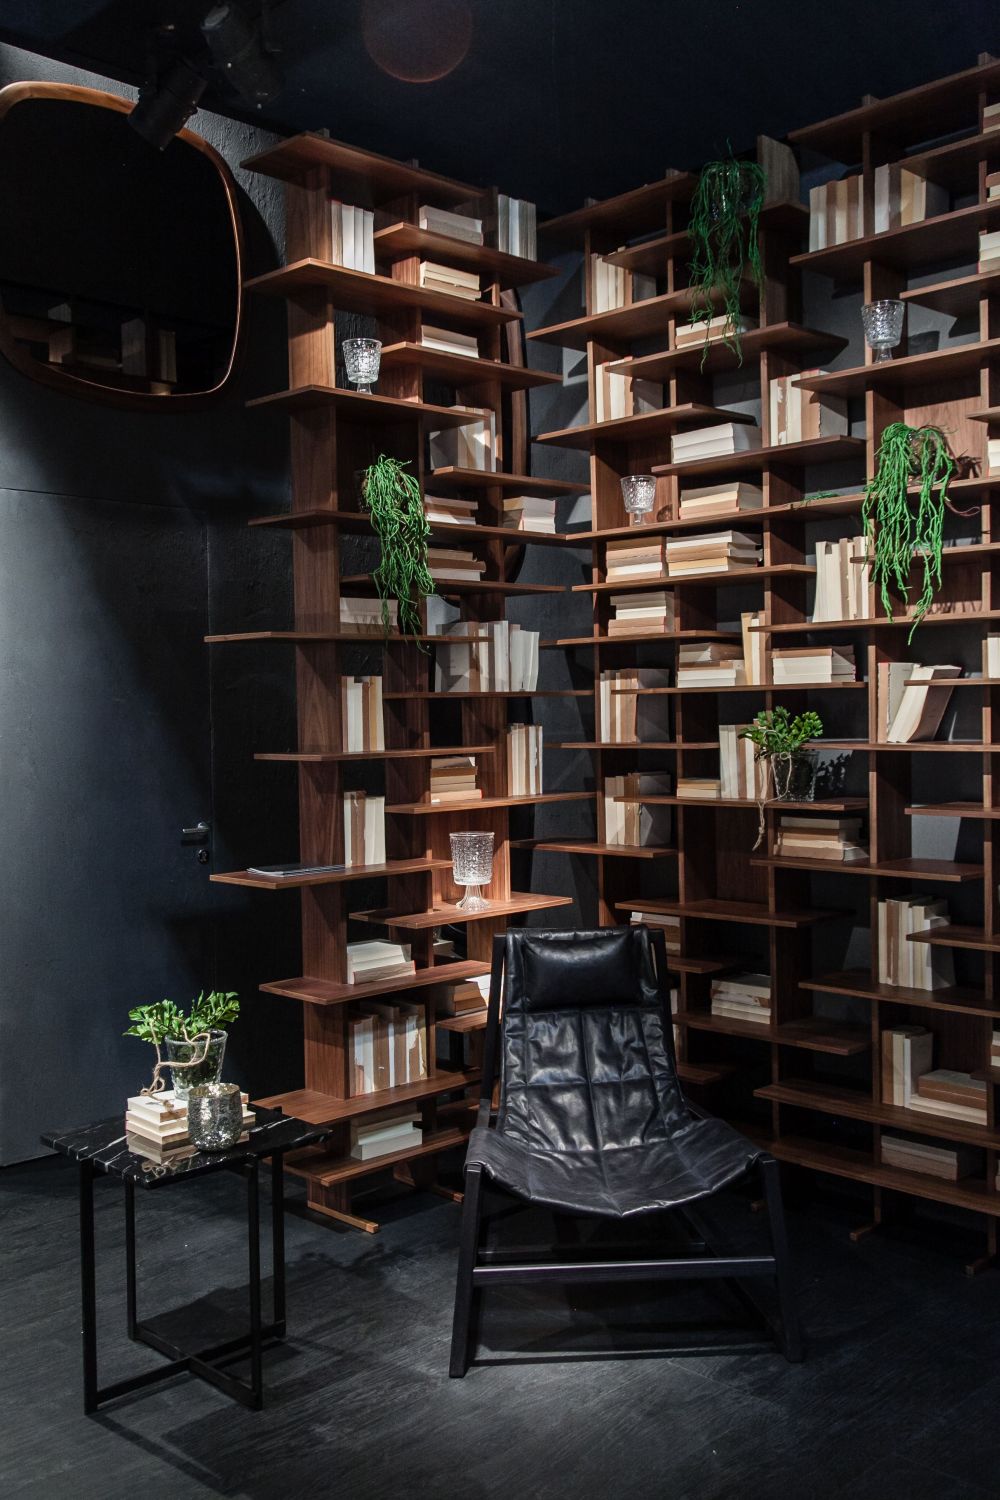 View bookshelf ideas in the gallery EQZCBPX